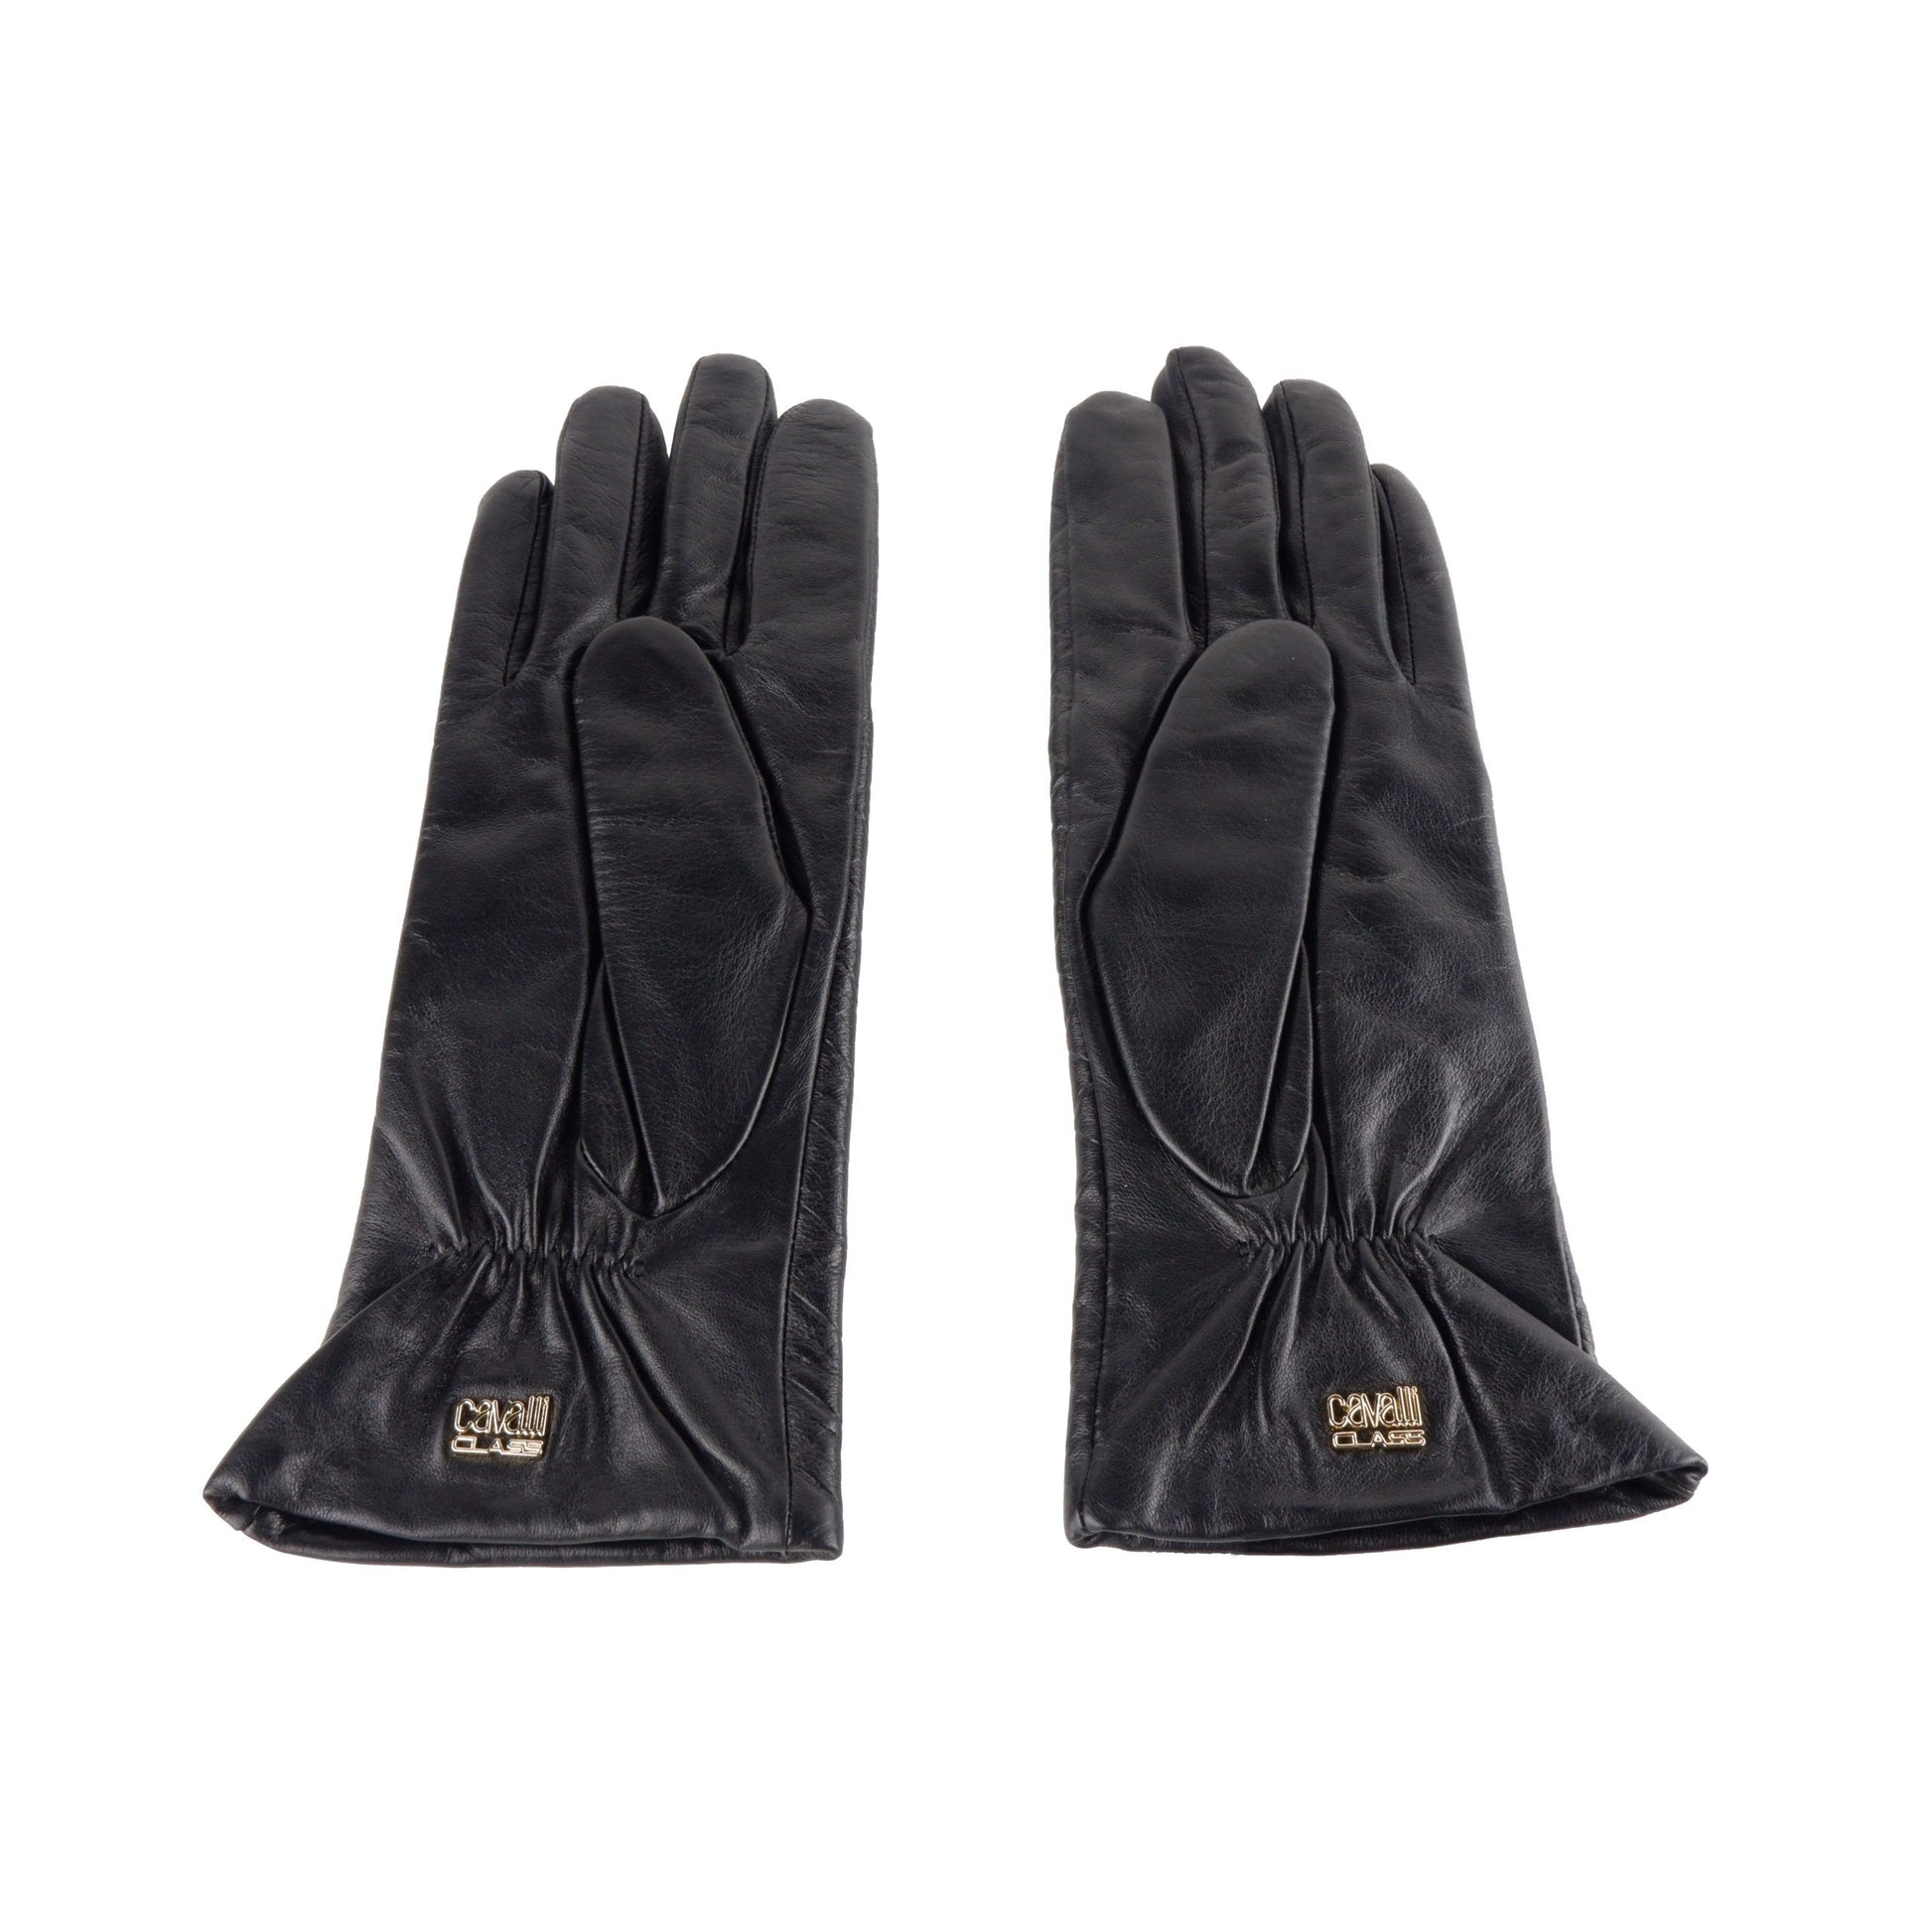 Cavalli Class Black Ladies Gloves - Designed by Cavalli Class Available to Buy at a Discounted Price on Moon Behind The Hill Online Designer Discount Store